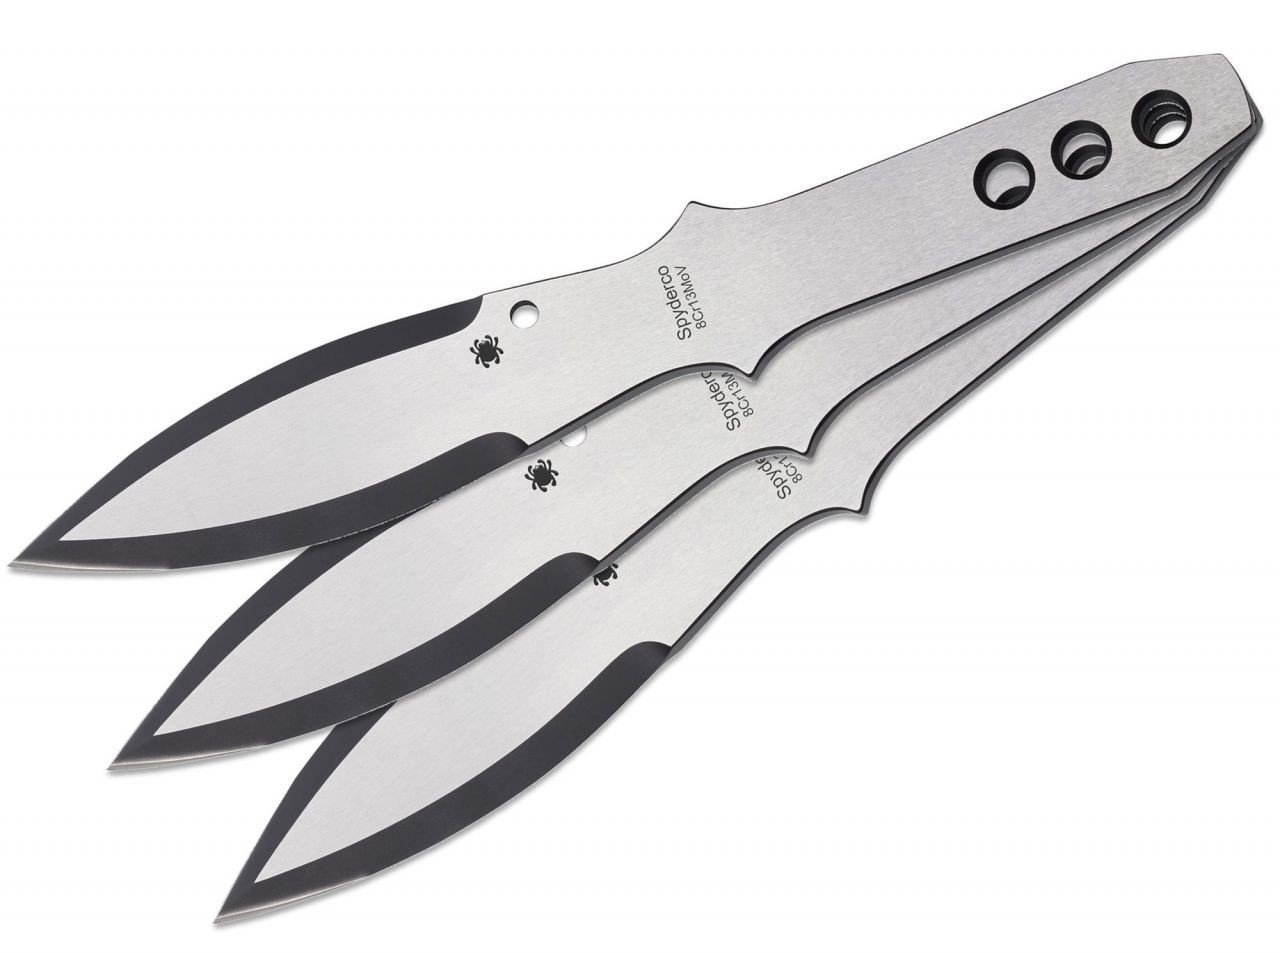 Corban steel custom forge throwing knives – Red Knives